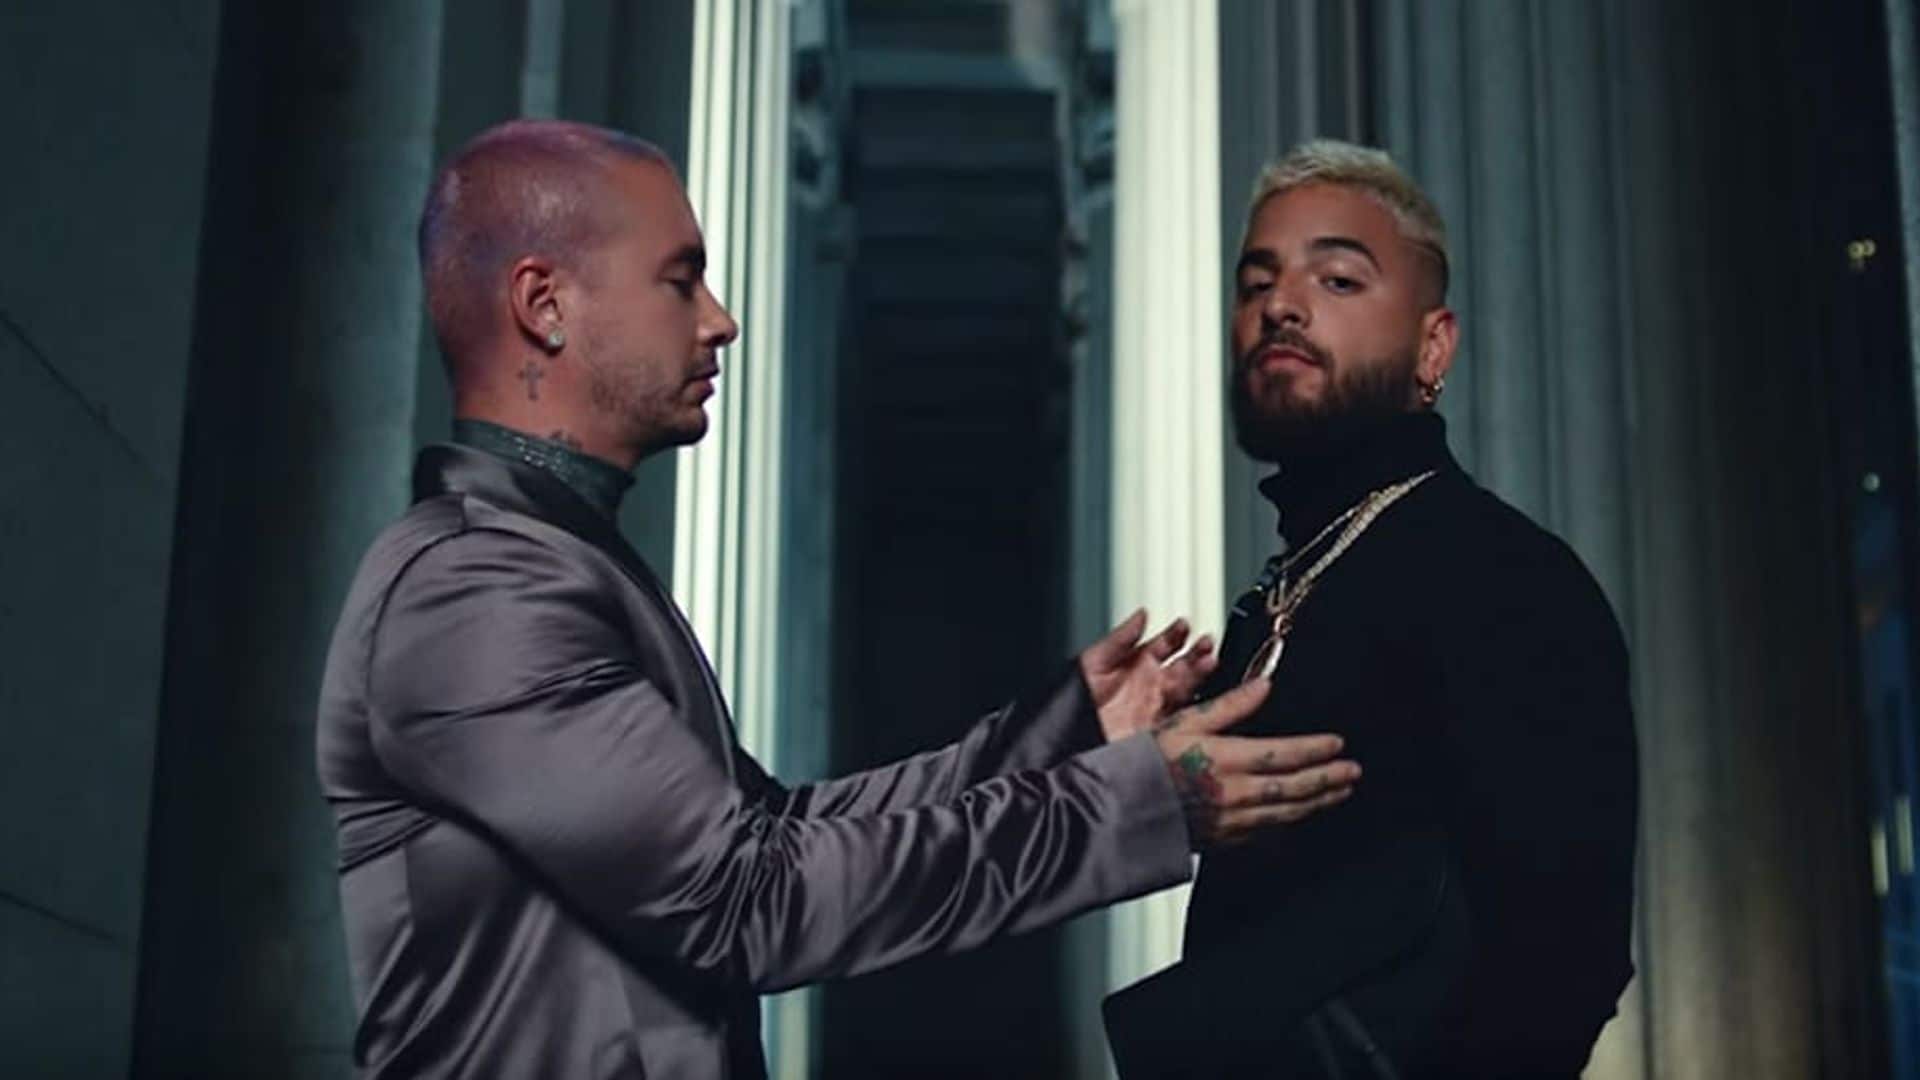 Maluma and J Balvin make joint appearance on historic cover 